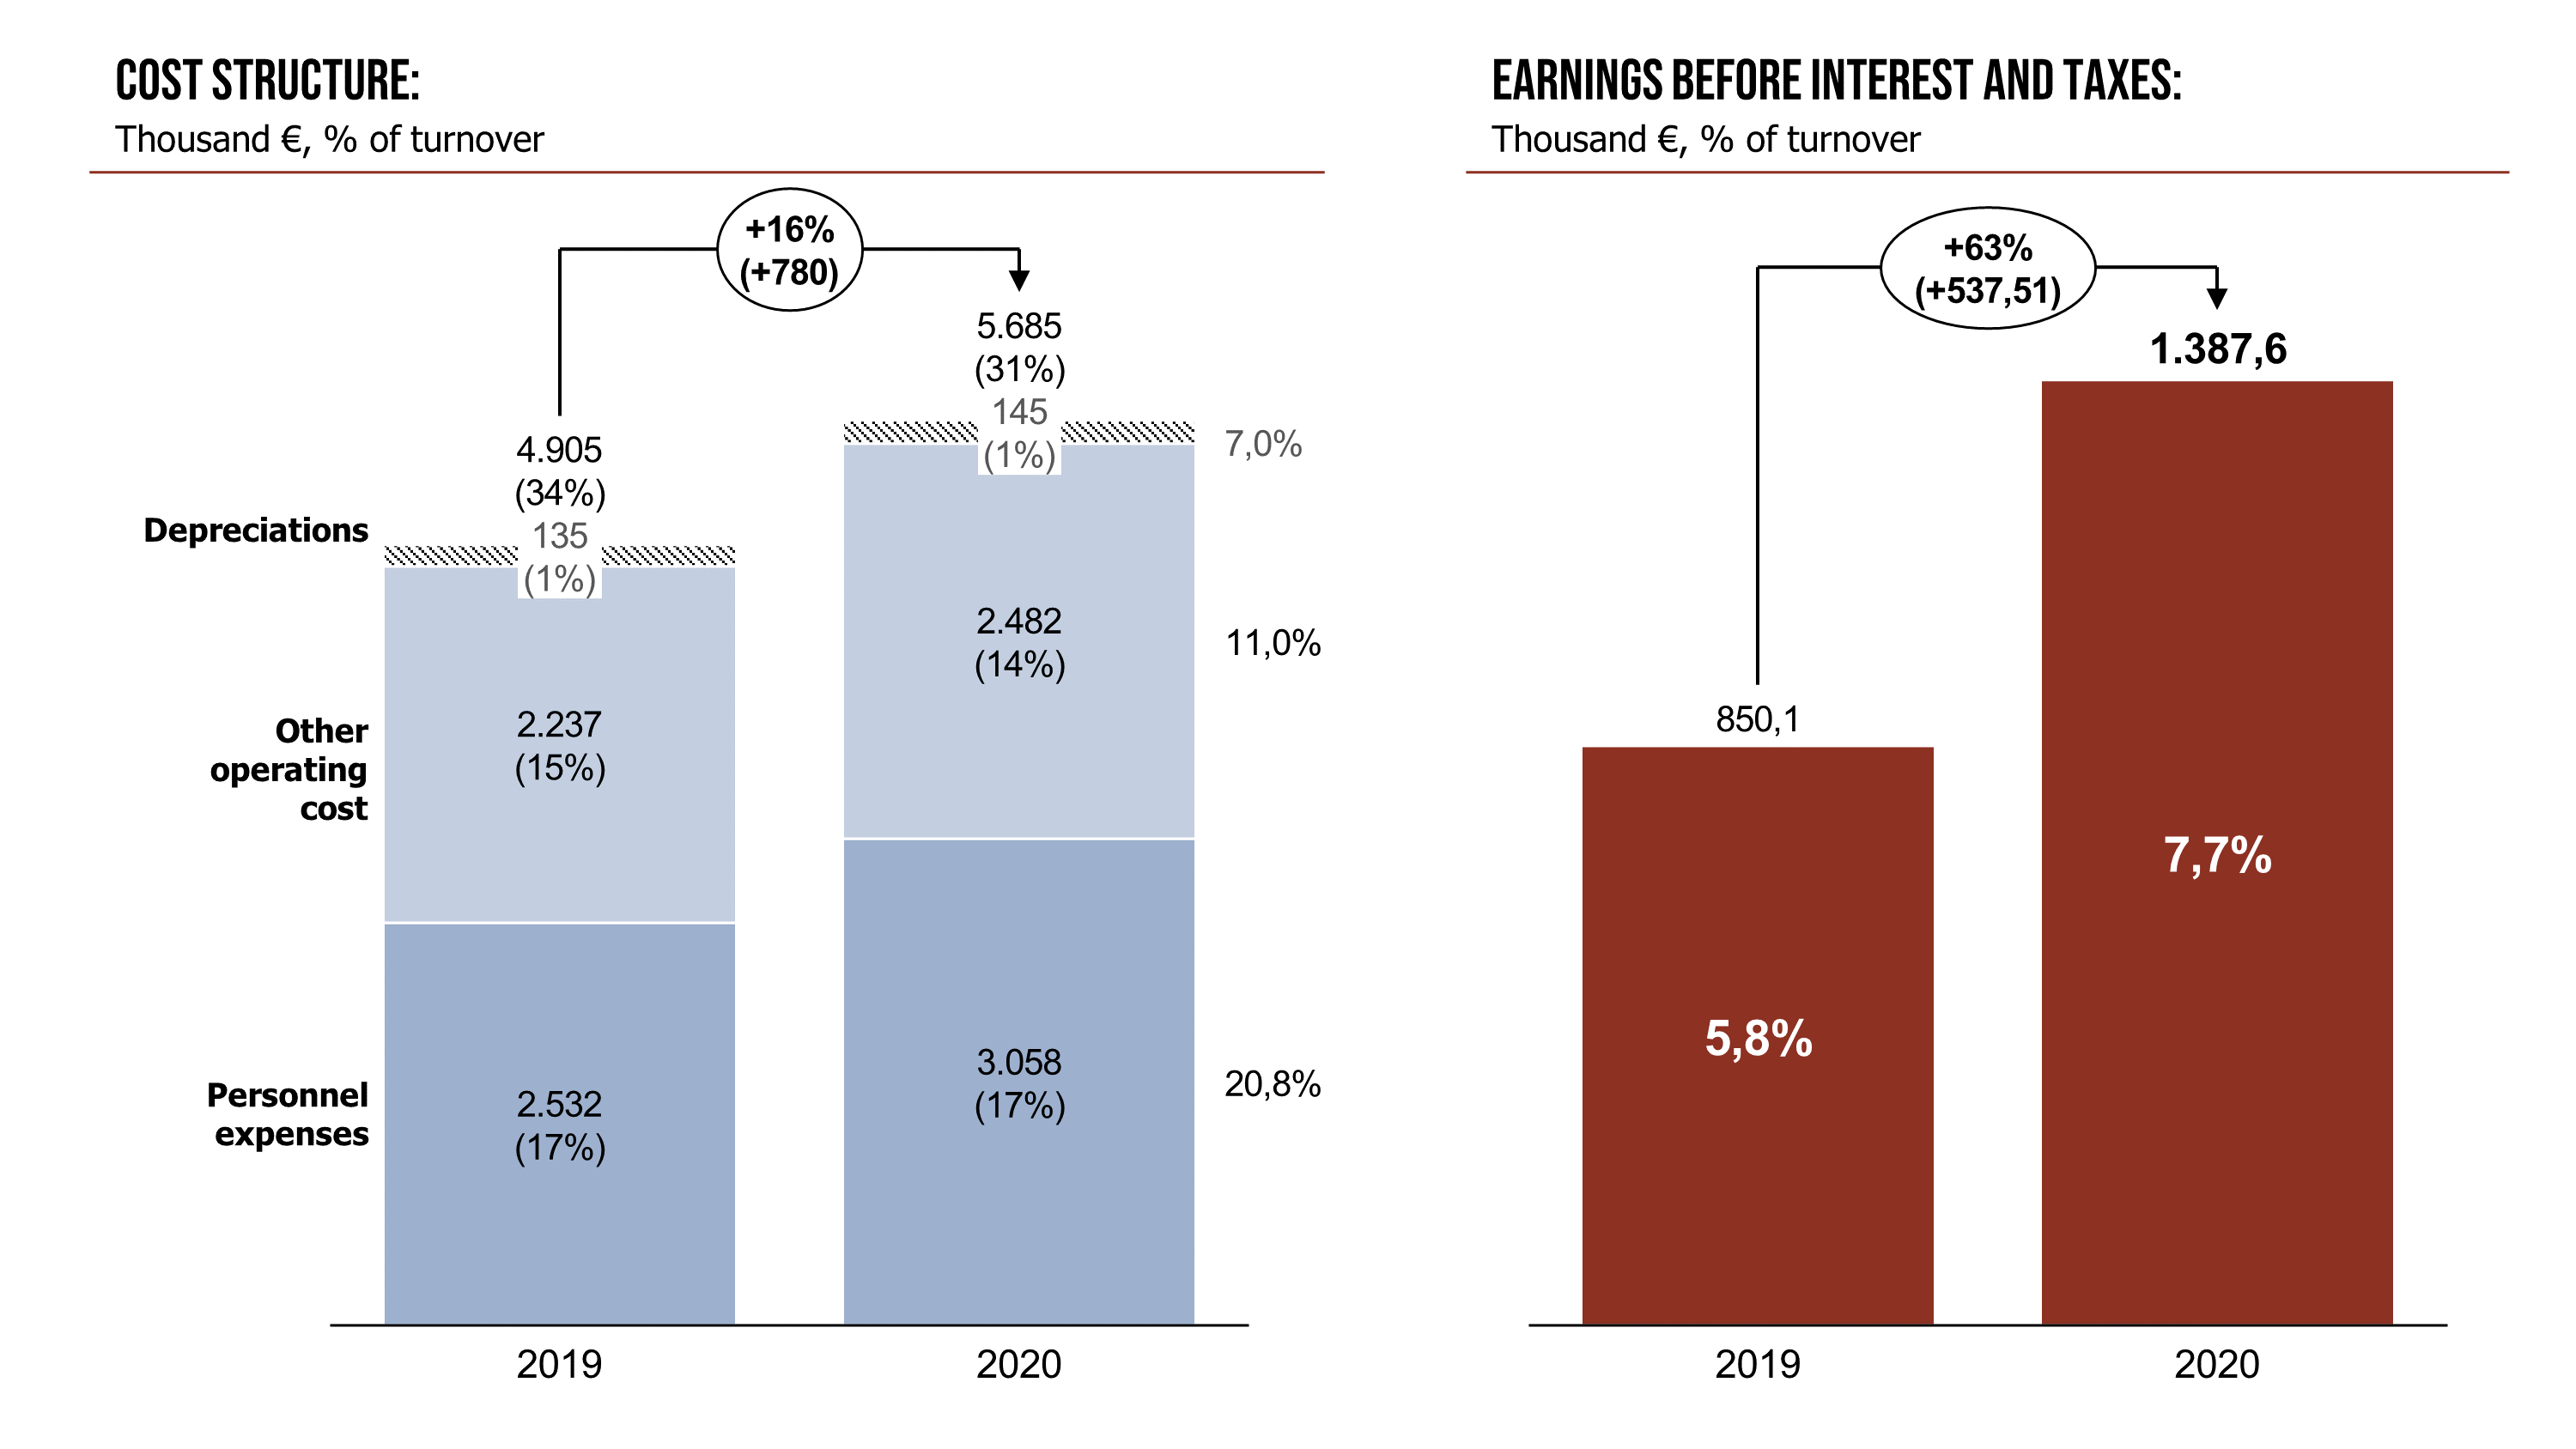 Varusteleka's cost structure and earnings before interest and taxes 2020